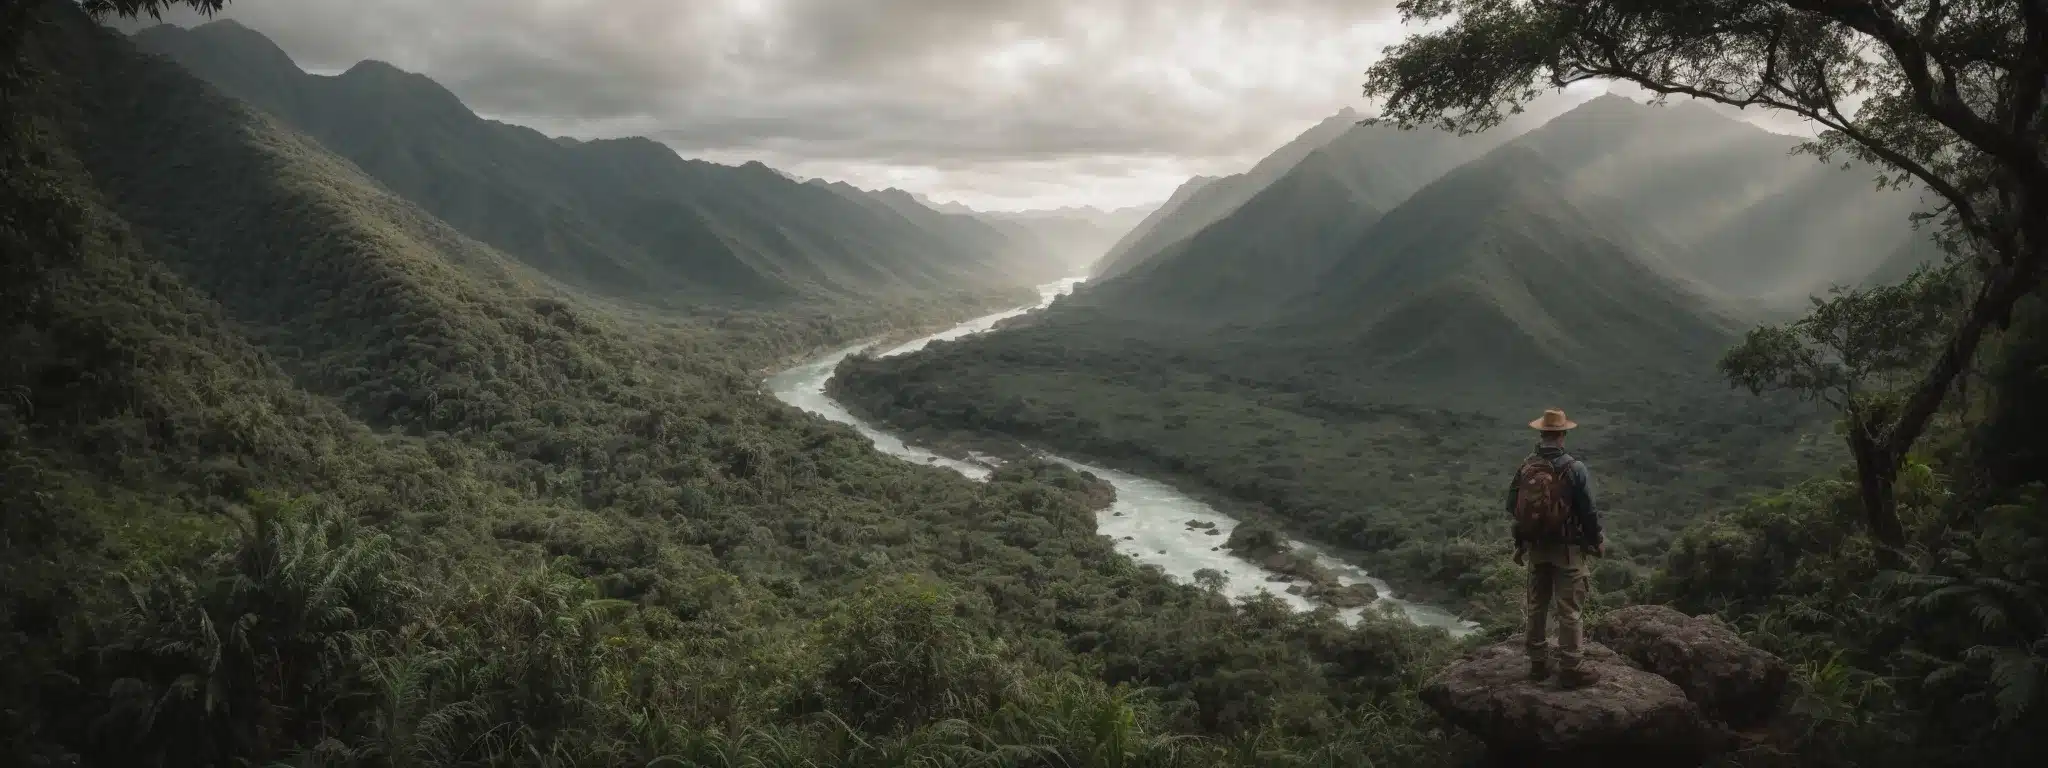 A Treasure Hunter Stands At The Edge Of A Dense Jungle With A River Winding Into The Distance And Mountains Looming In The Background.